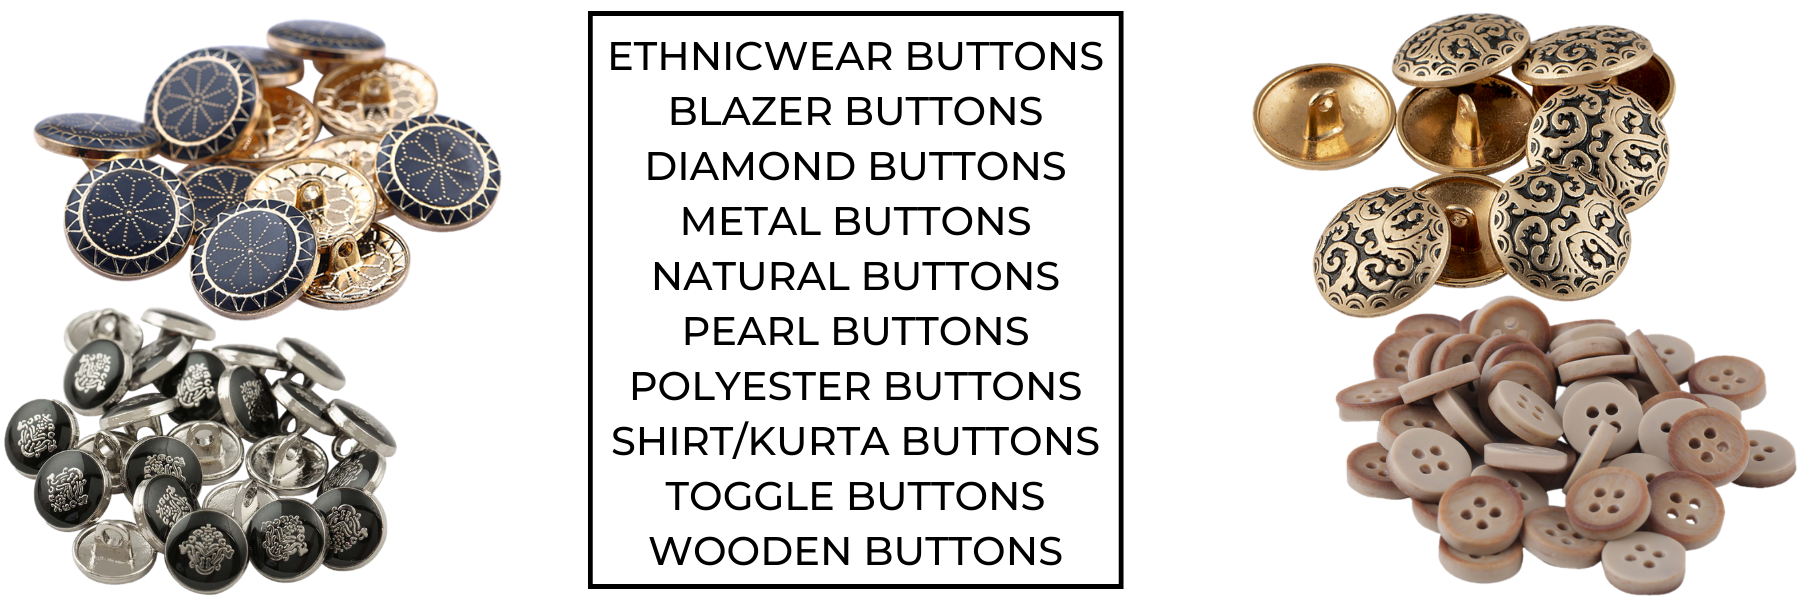 Fancy Buttons, Zips and Buttons